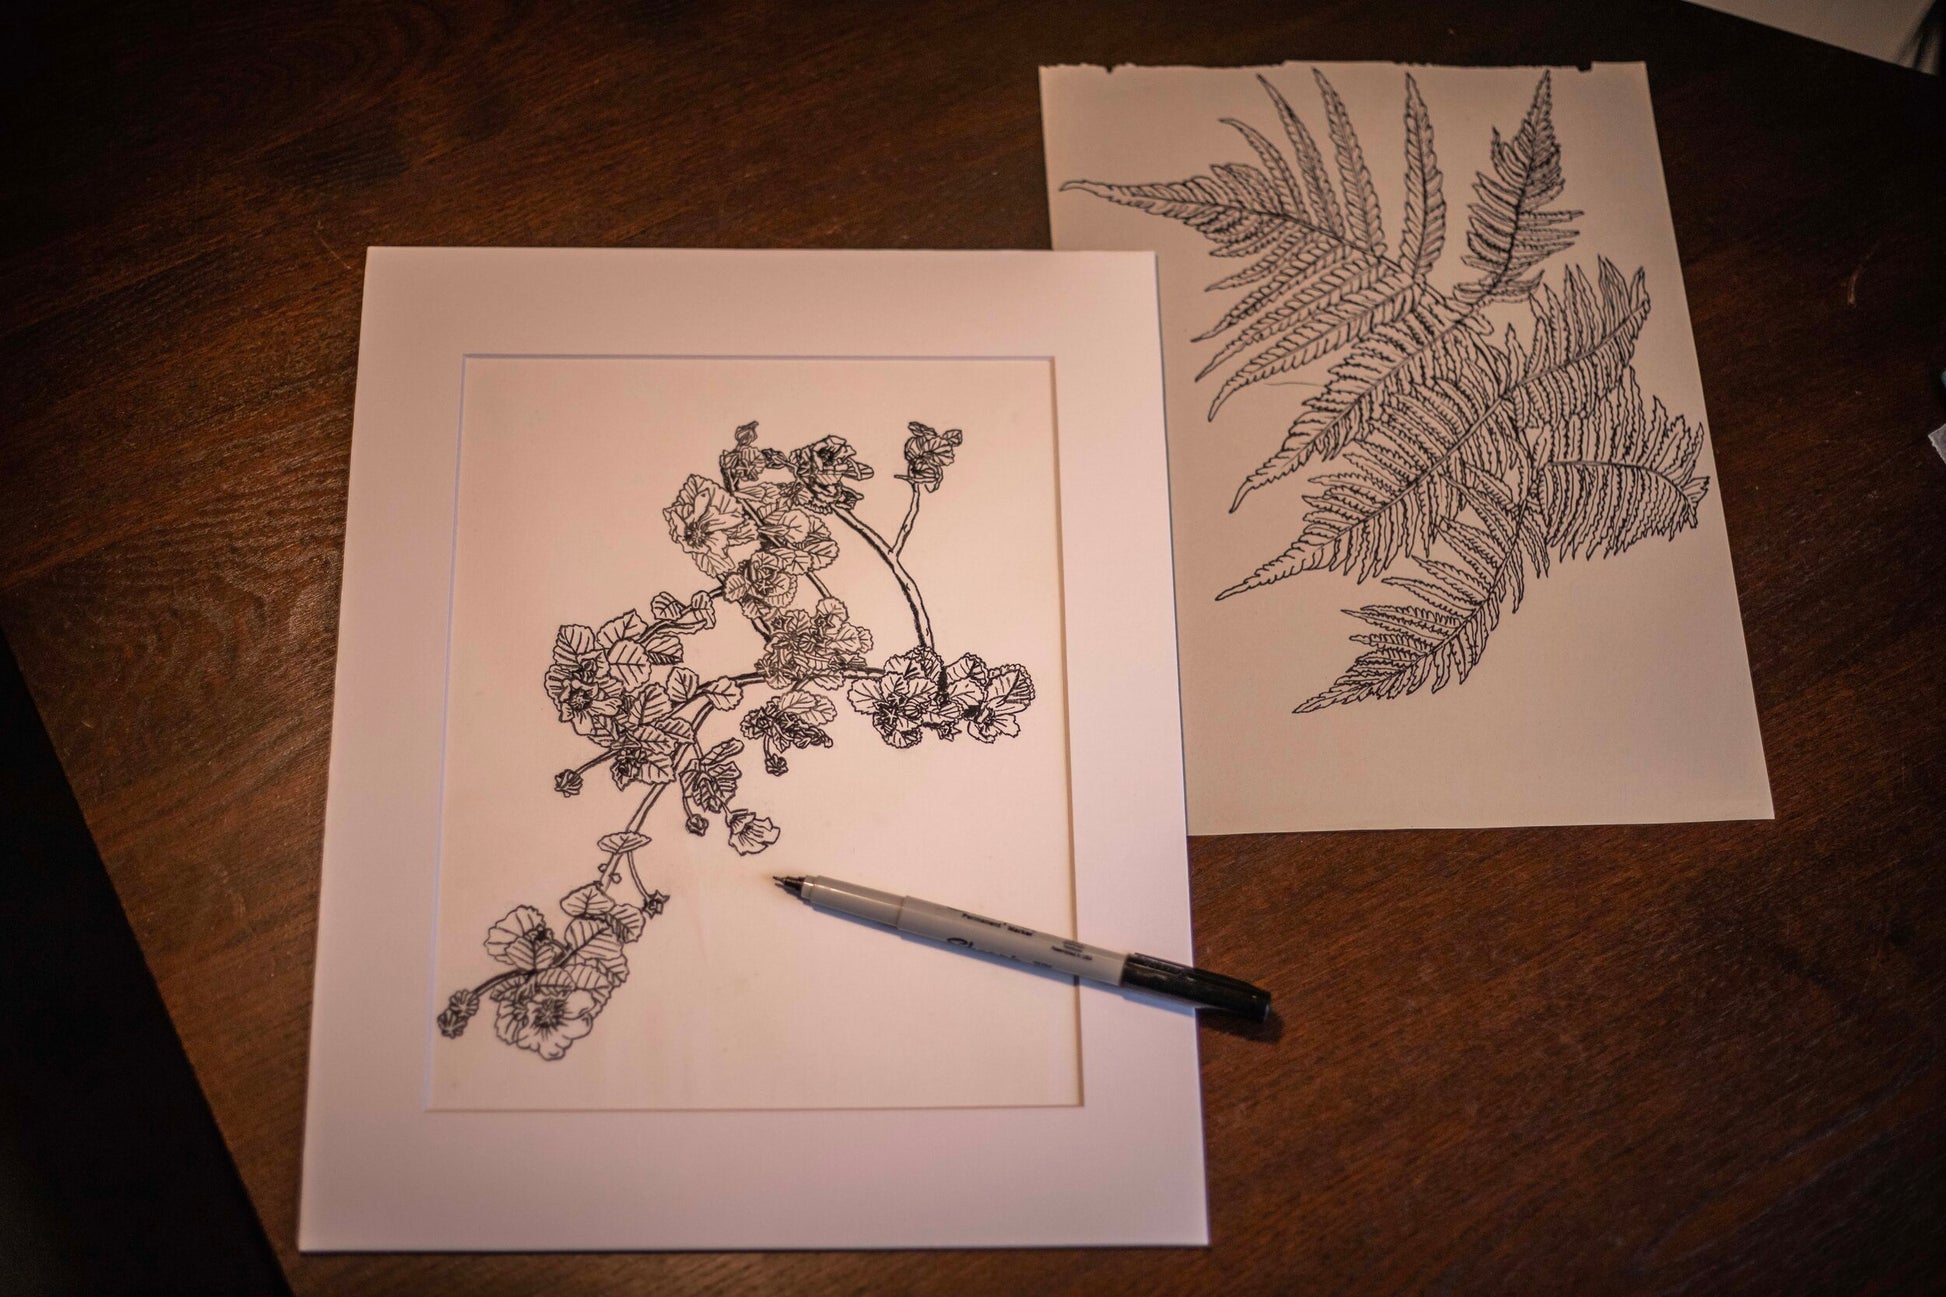 Handcrafted, drawn and Made in Hawaii Prints